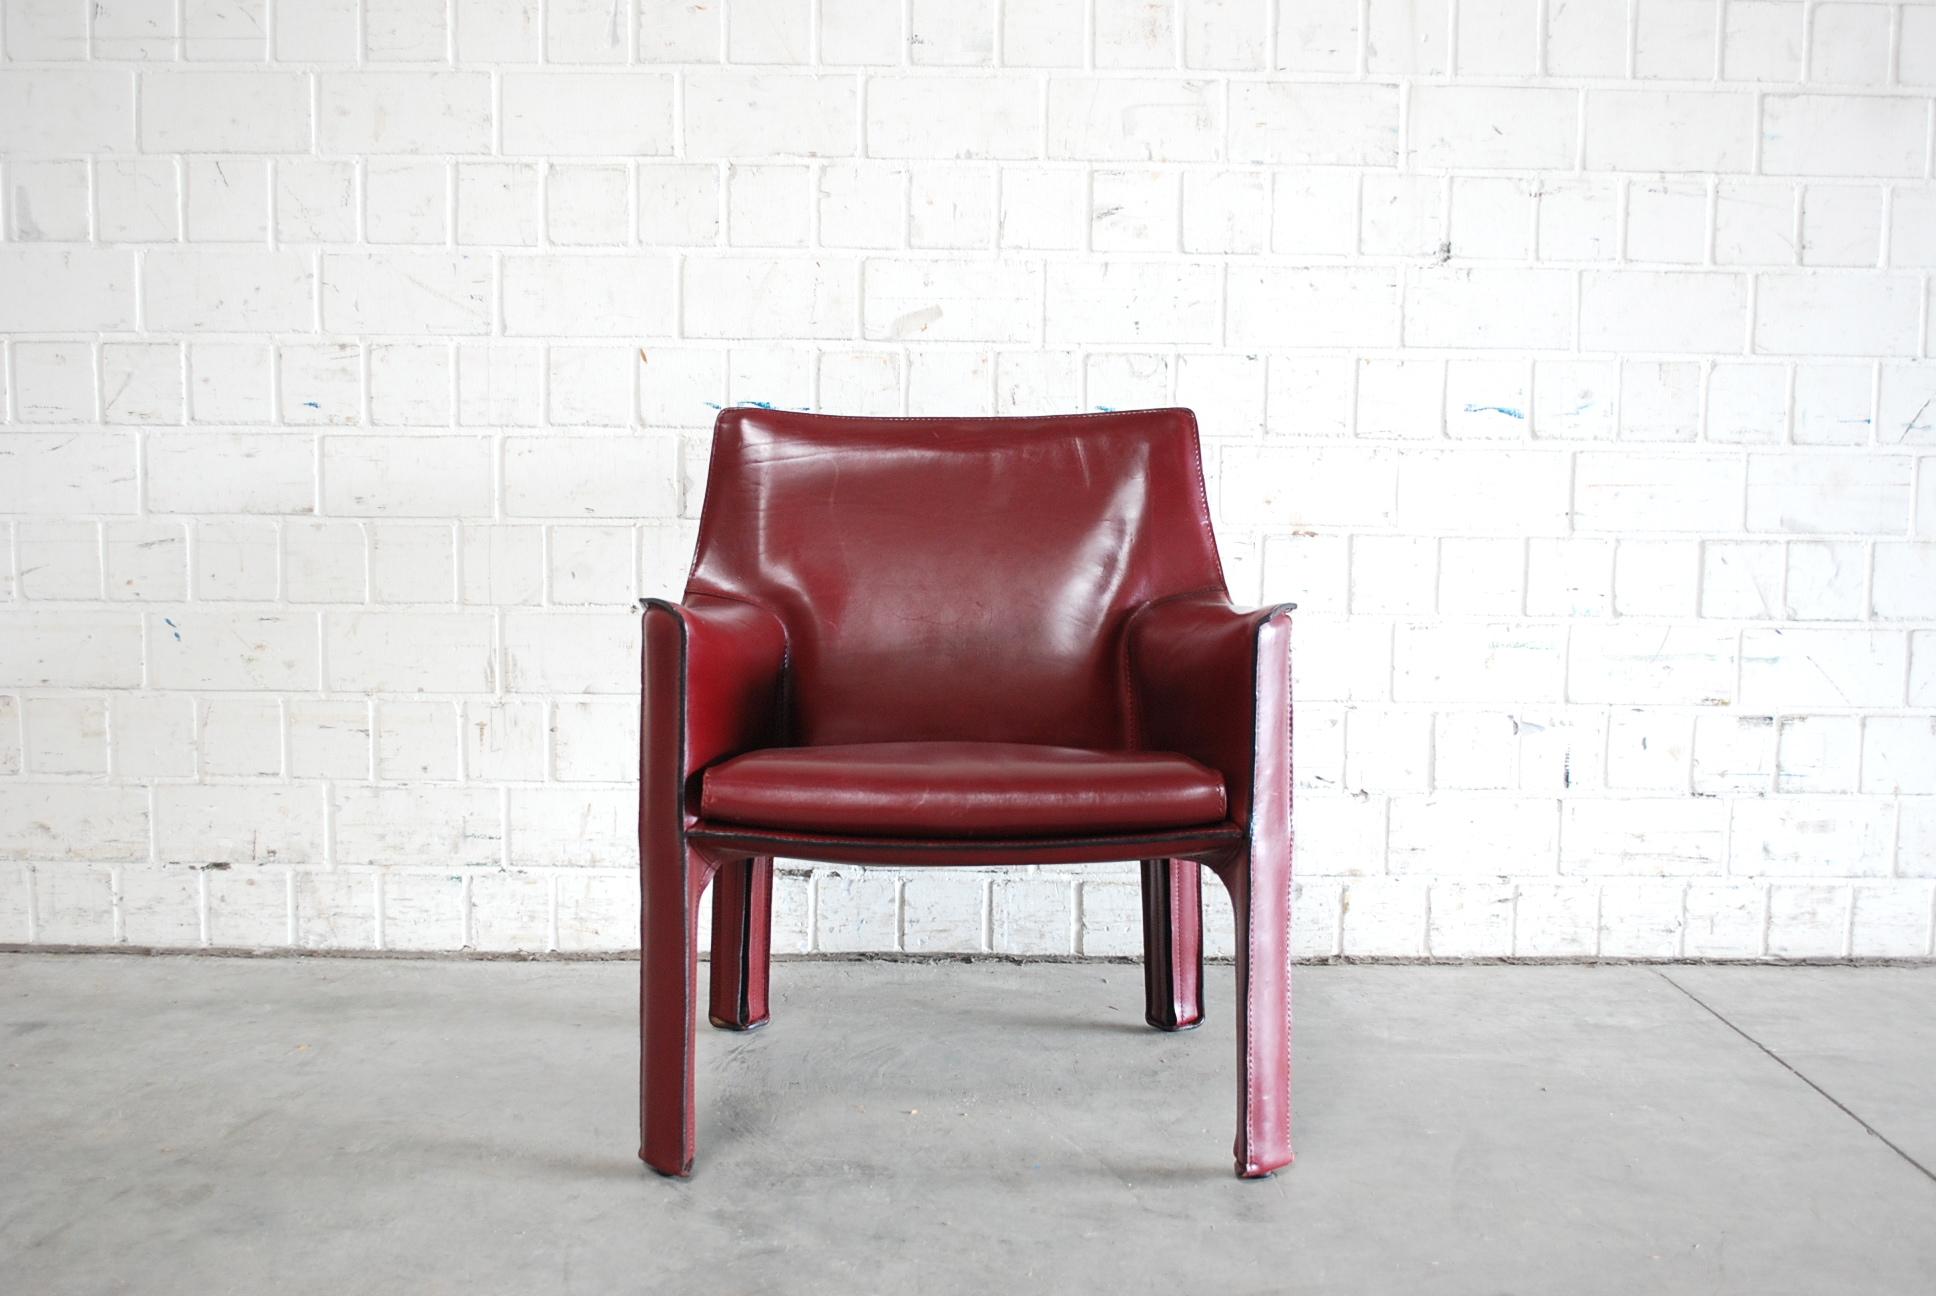 This cab 414 armchair was designed by Mario Bellini for Italian manufacturer Cassina.
It´s the armchair version with comfortable seat padding.
It is upholstered in thick saddle leather, colour Bordeaux red 

We have 2 cab chairs in stock.